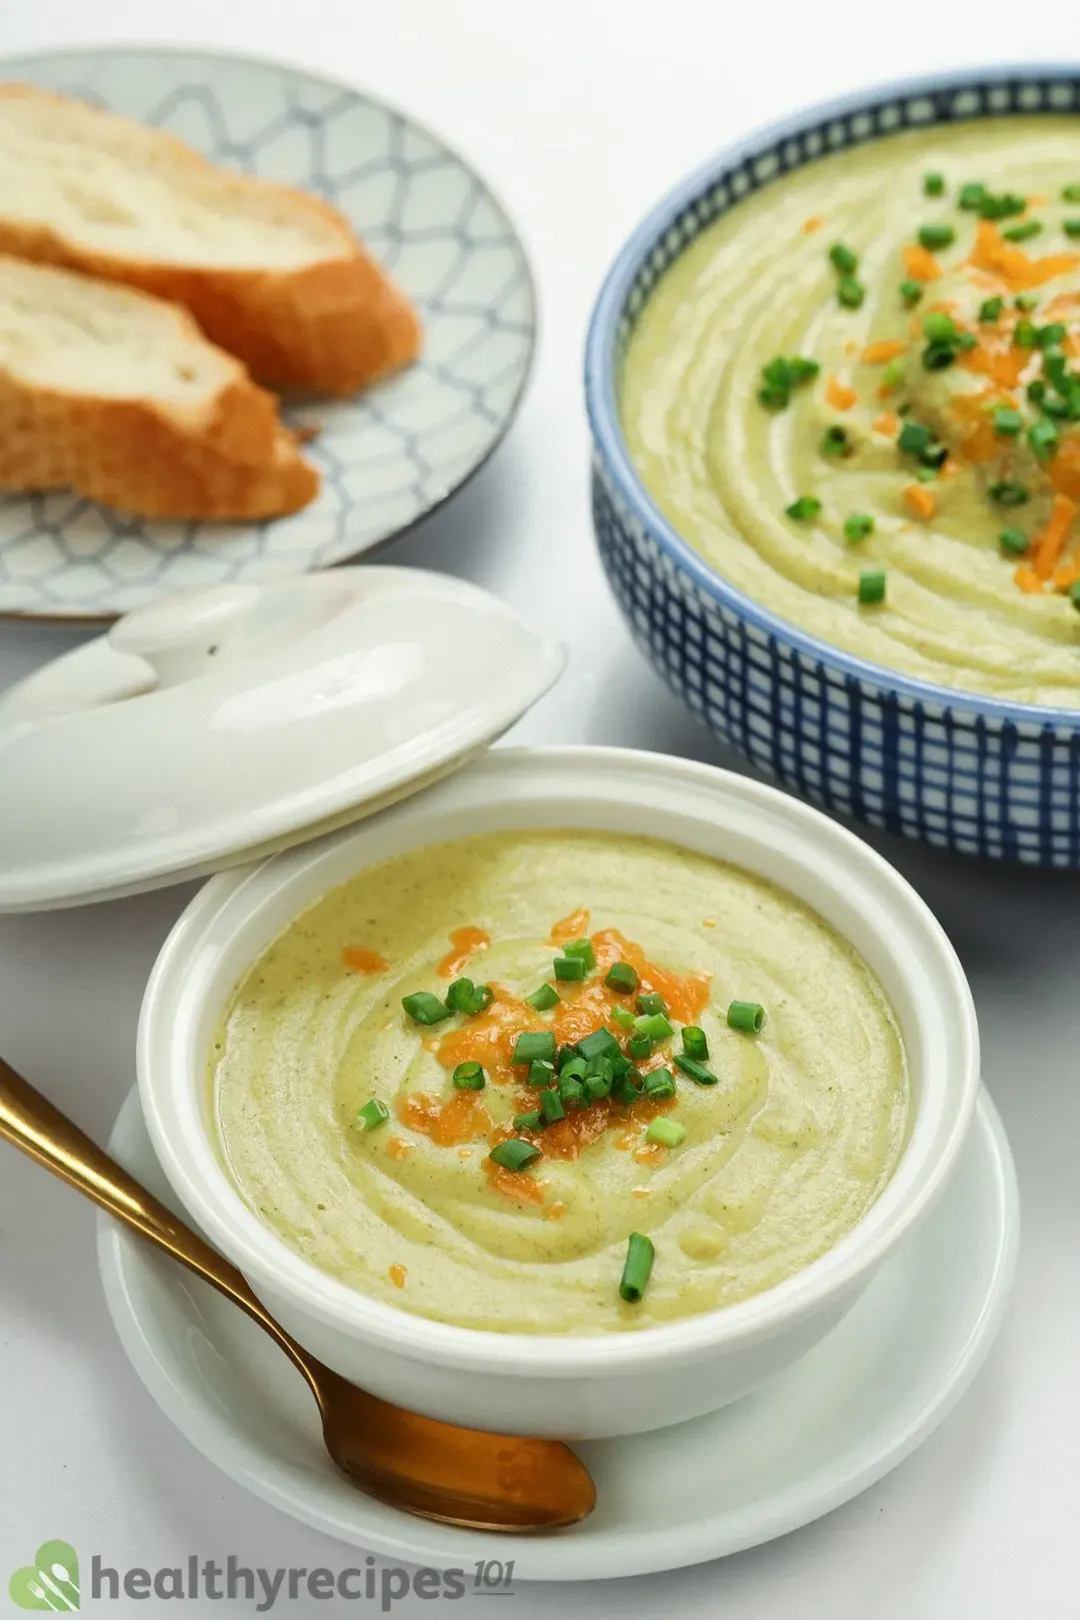 Tips to Make the Best Broccoli Cheese Soup